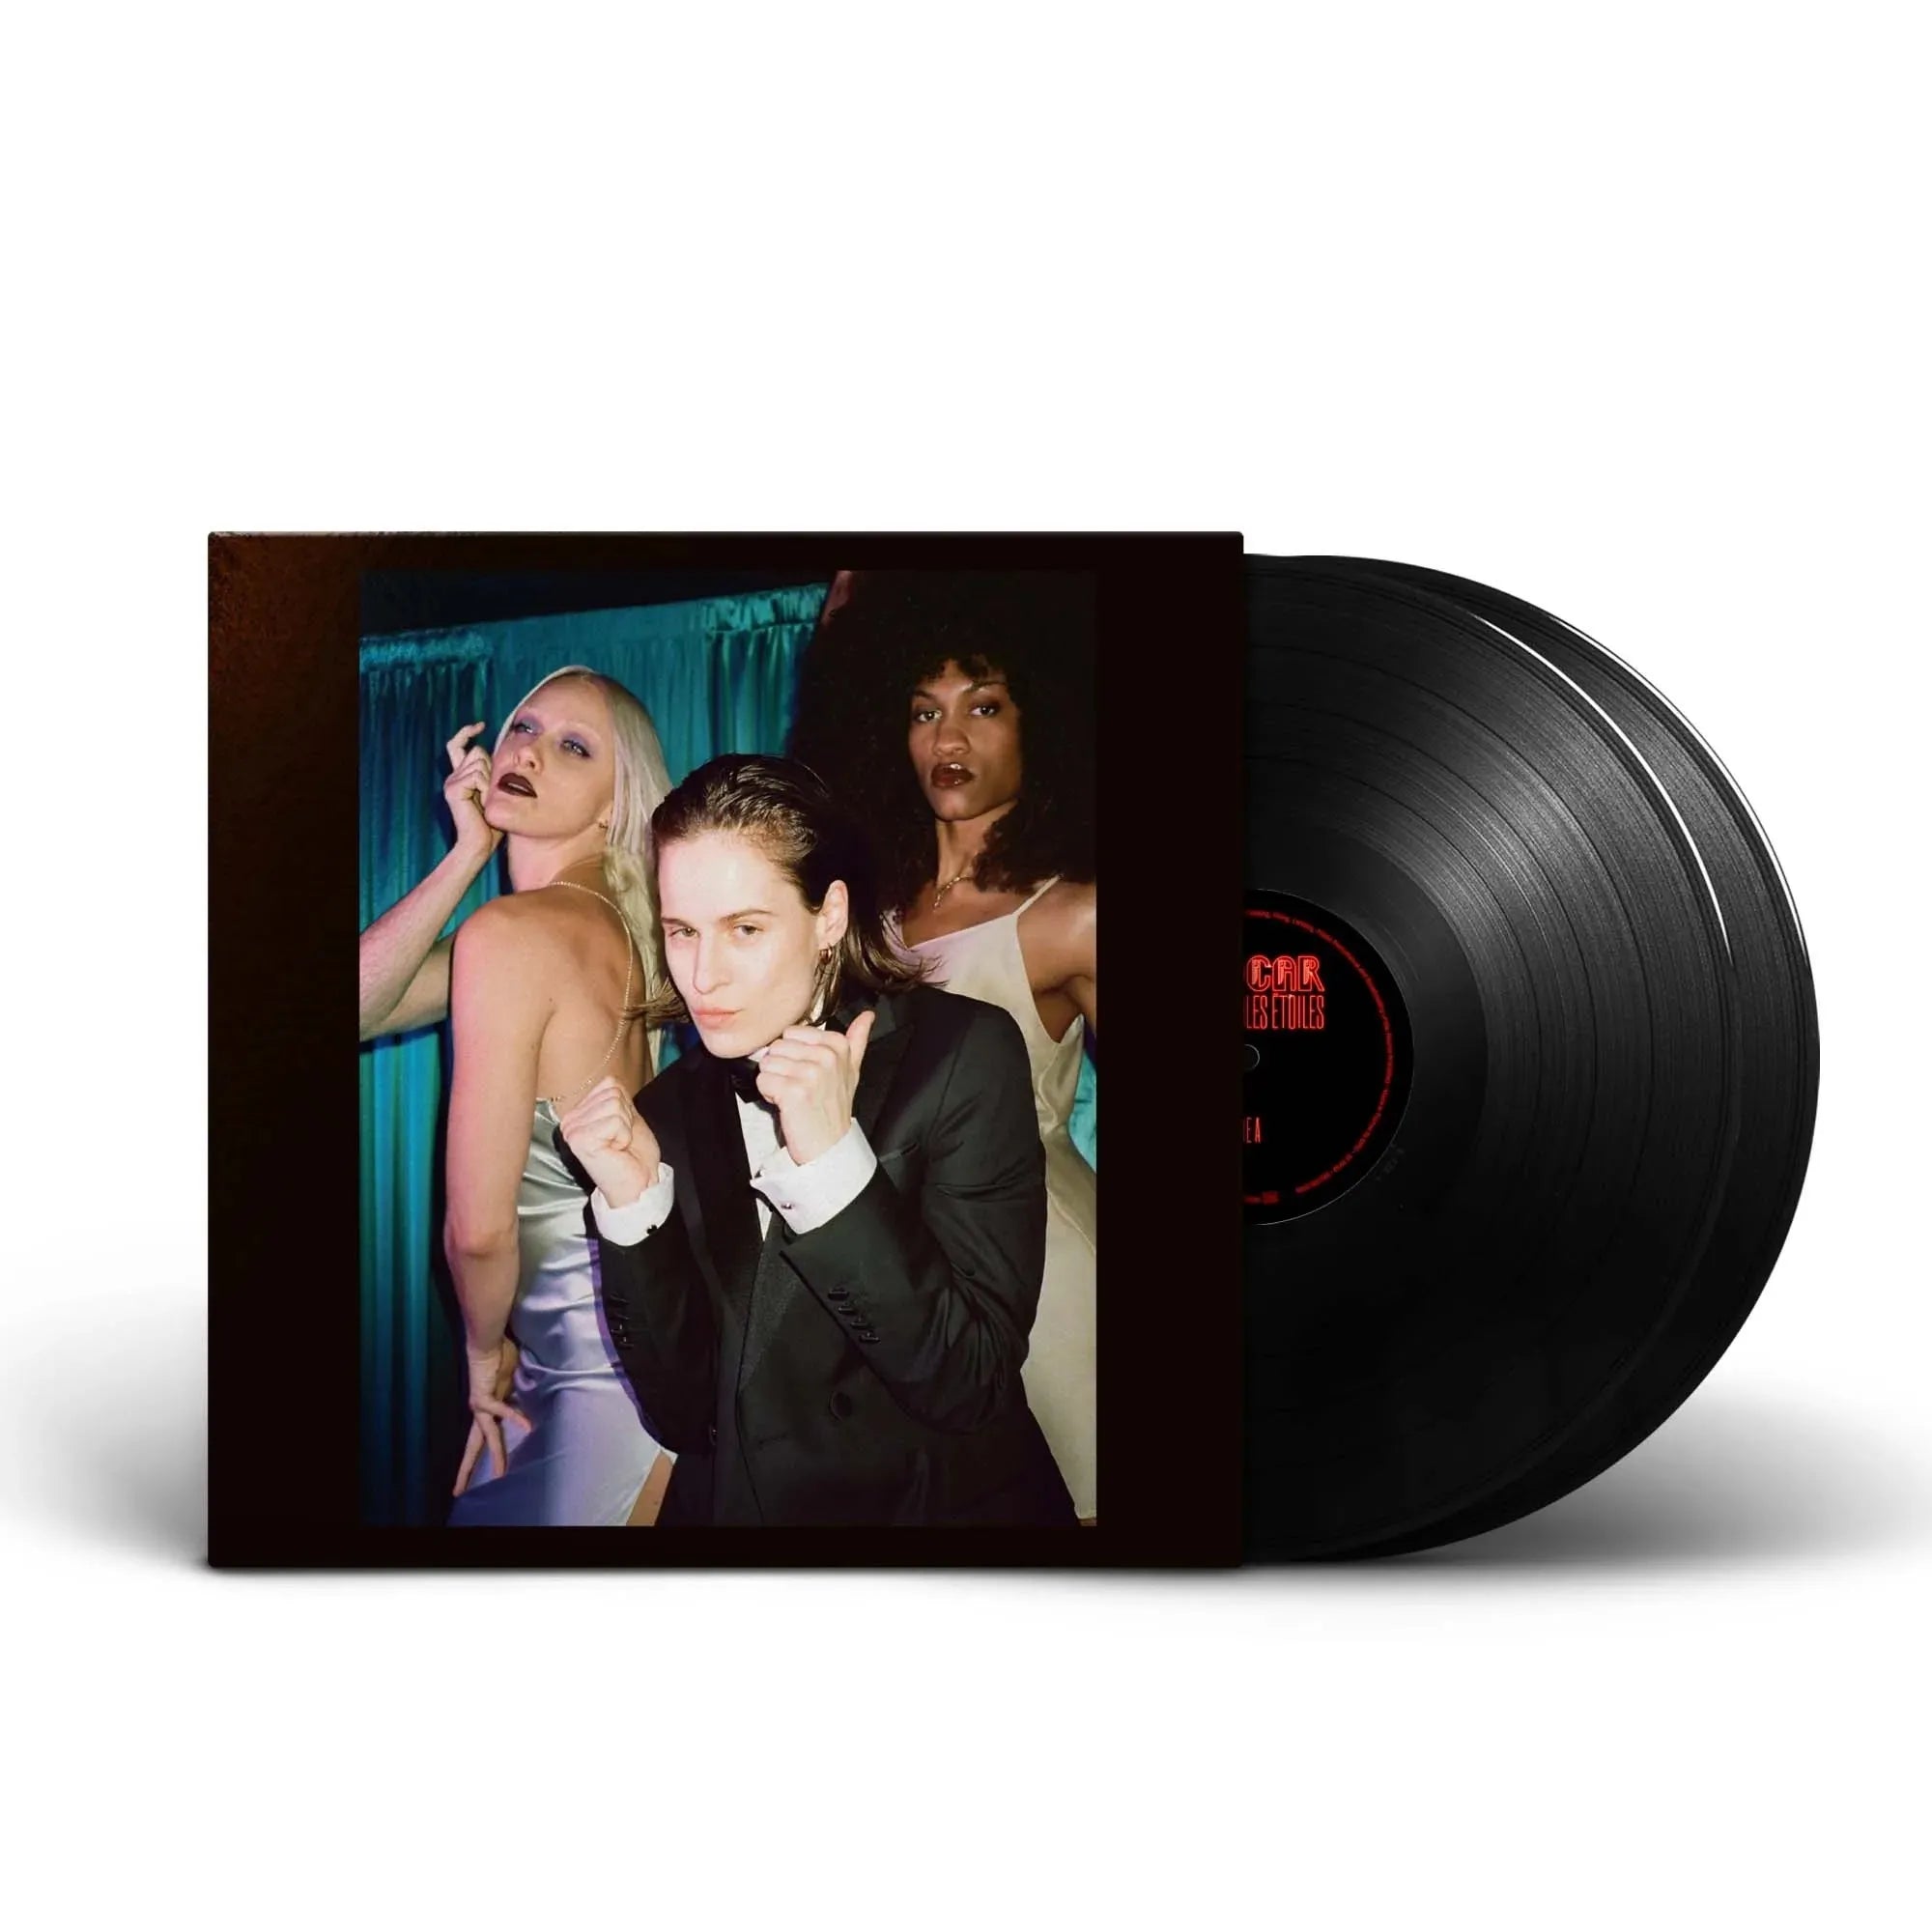  |  Preorder | Christine and the Queens - Redcar Les Adorables Etoiles (2 LPs) | Records on Vinyl